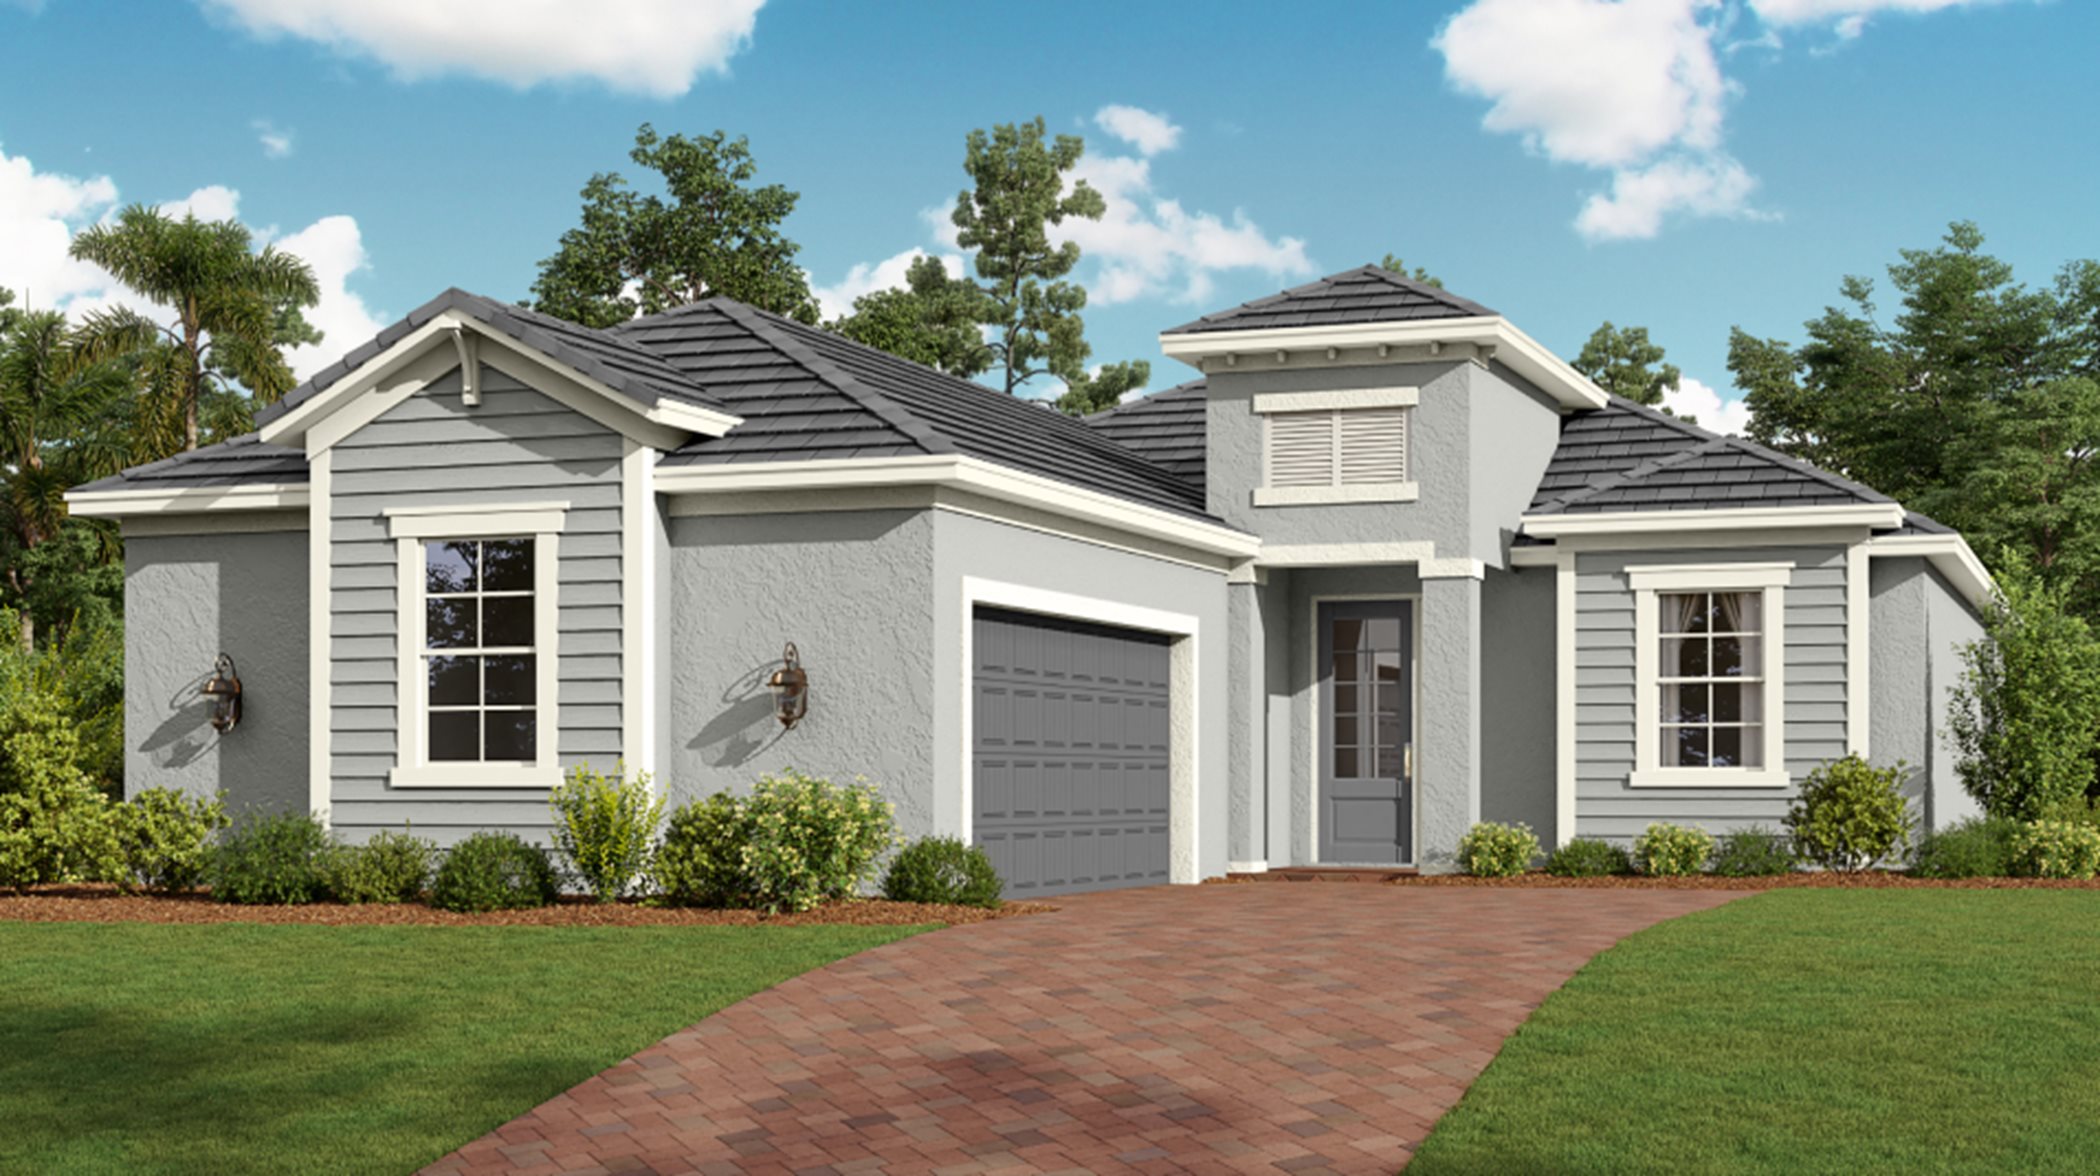  Tuscan exterior rendering of Victoria